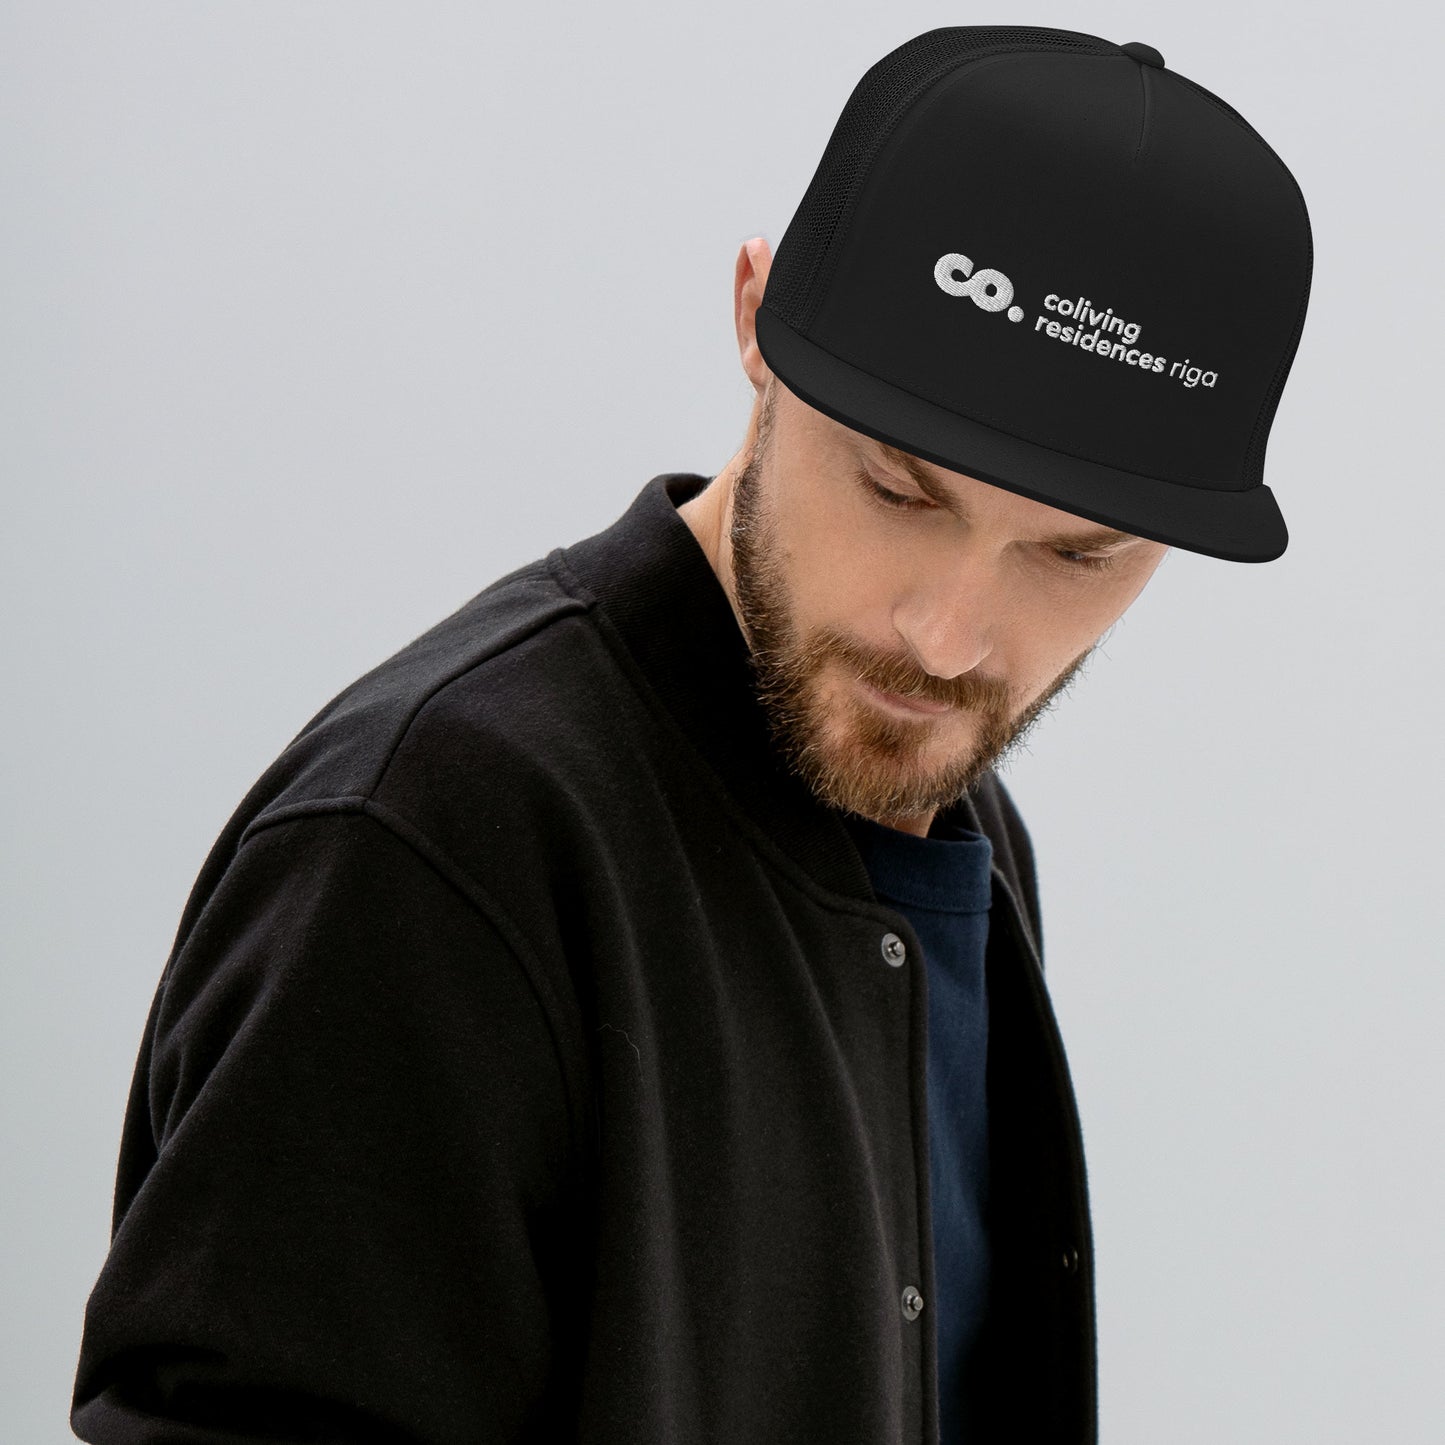 White man with a beard wearing a black trucker cap featuring the Coliving Residences logo